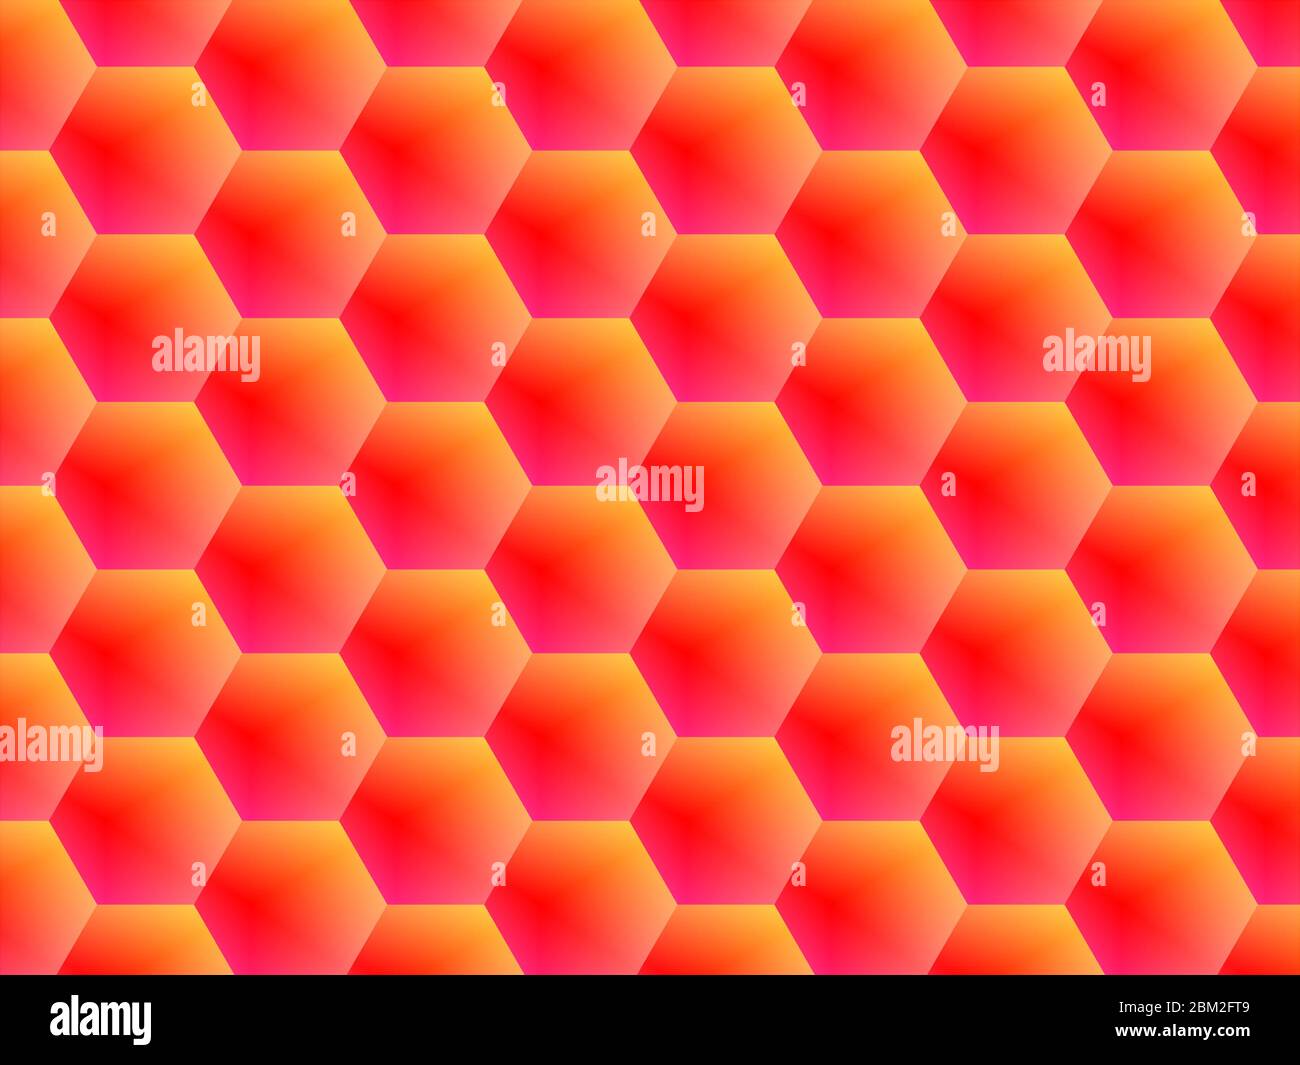 Abstract background, vibrant red, yellow gradient, hexagons horizontal dynamic modern decorative pattern Stock Photo